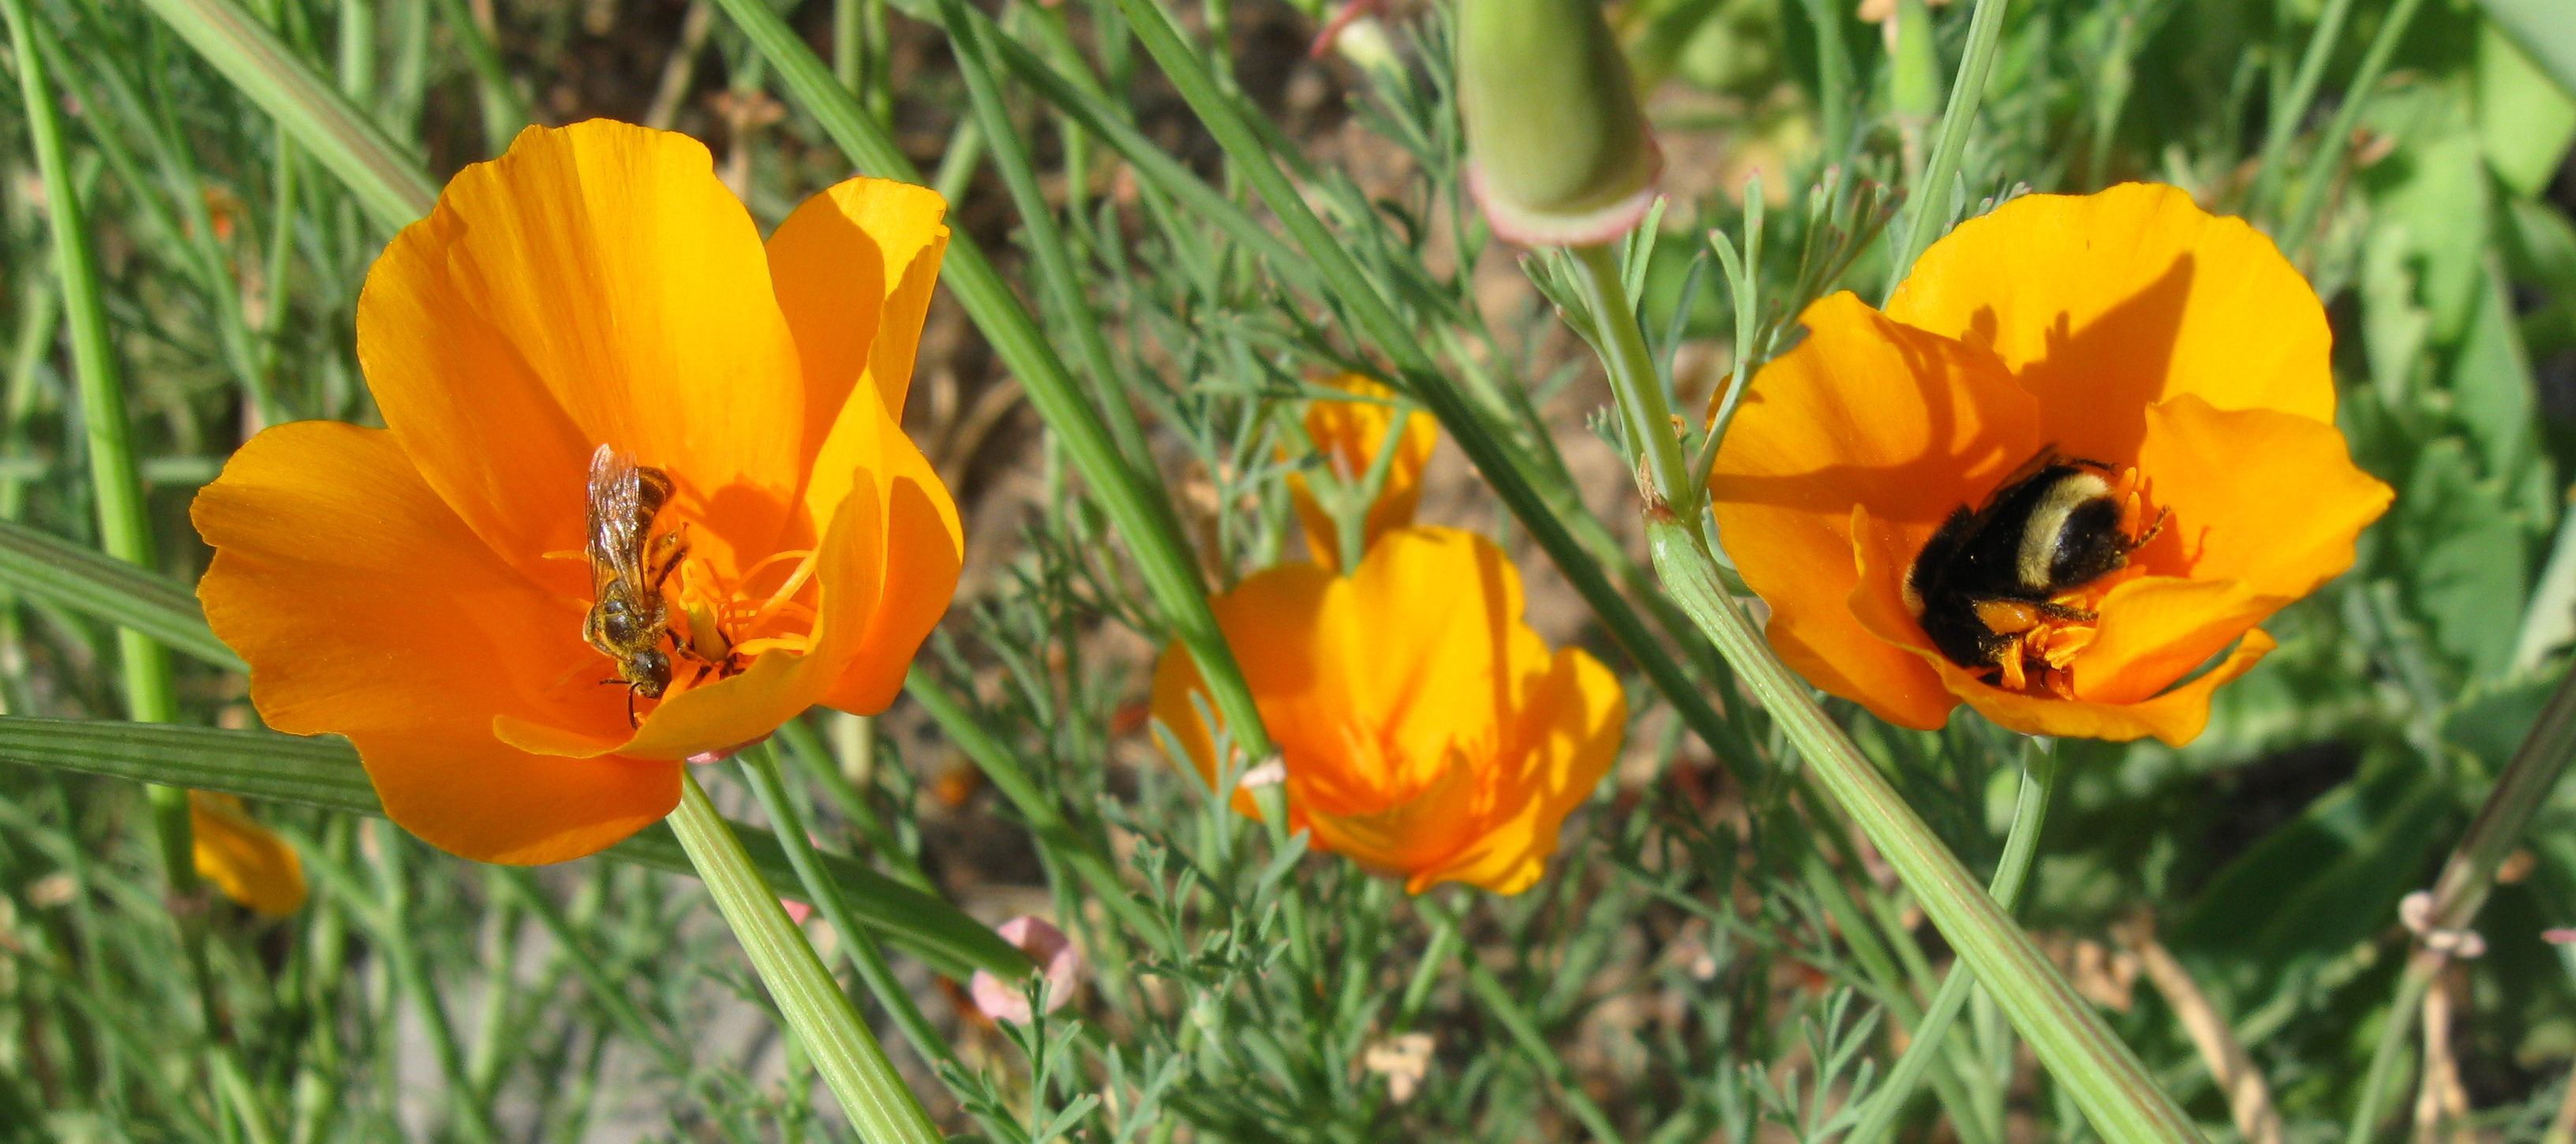 Three bright yellow-orange poppies are shown in a grassy area. The two poppies that are wide open and facing the camera each have a bee in the middle. On the left is a green, shiny bee. On the right is a large, primarily black, fuzzy bee.